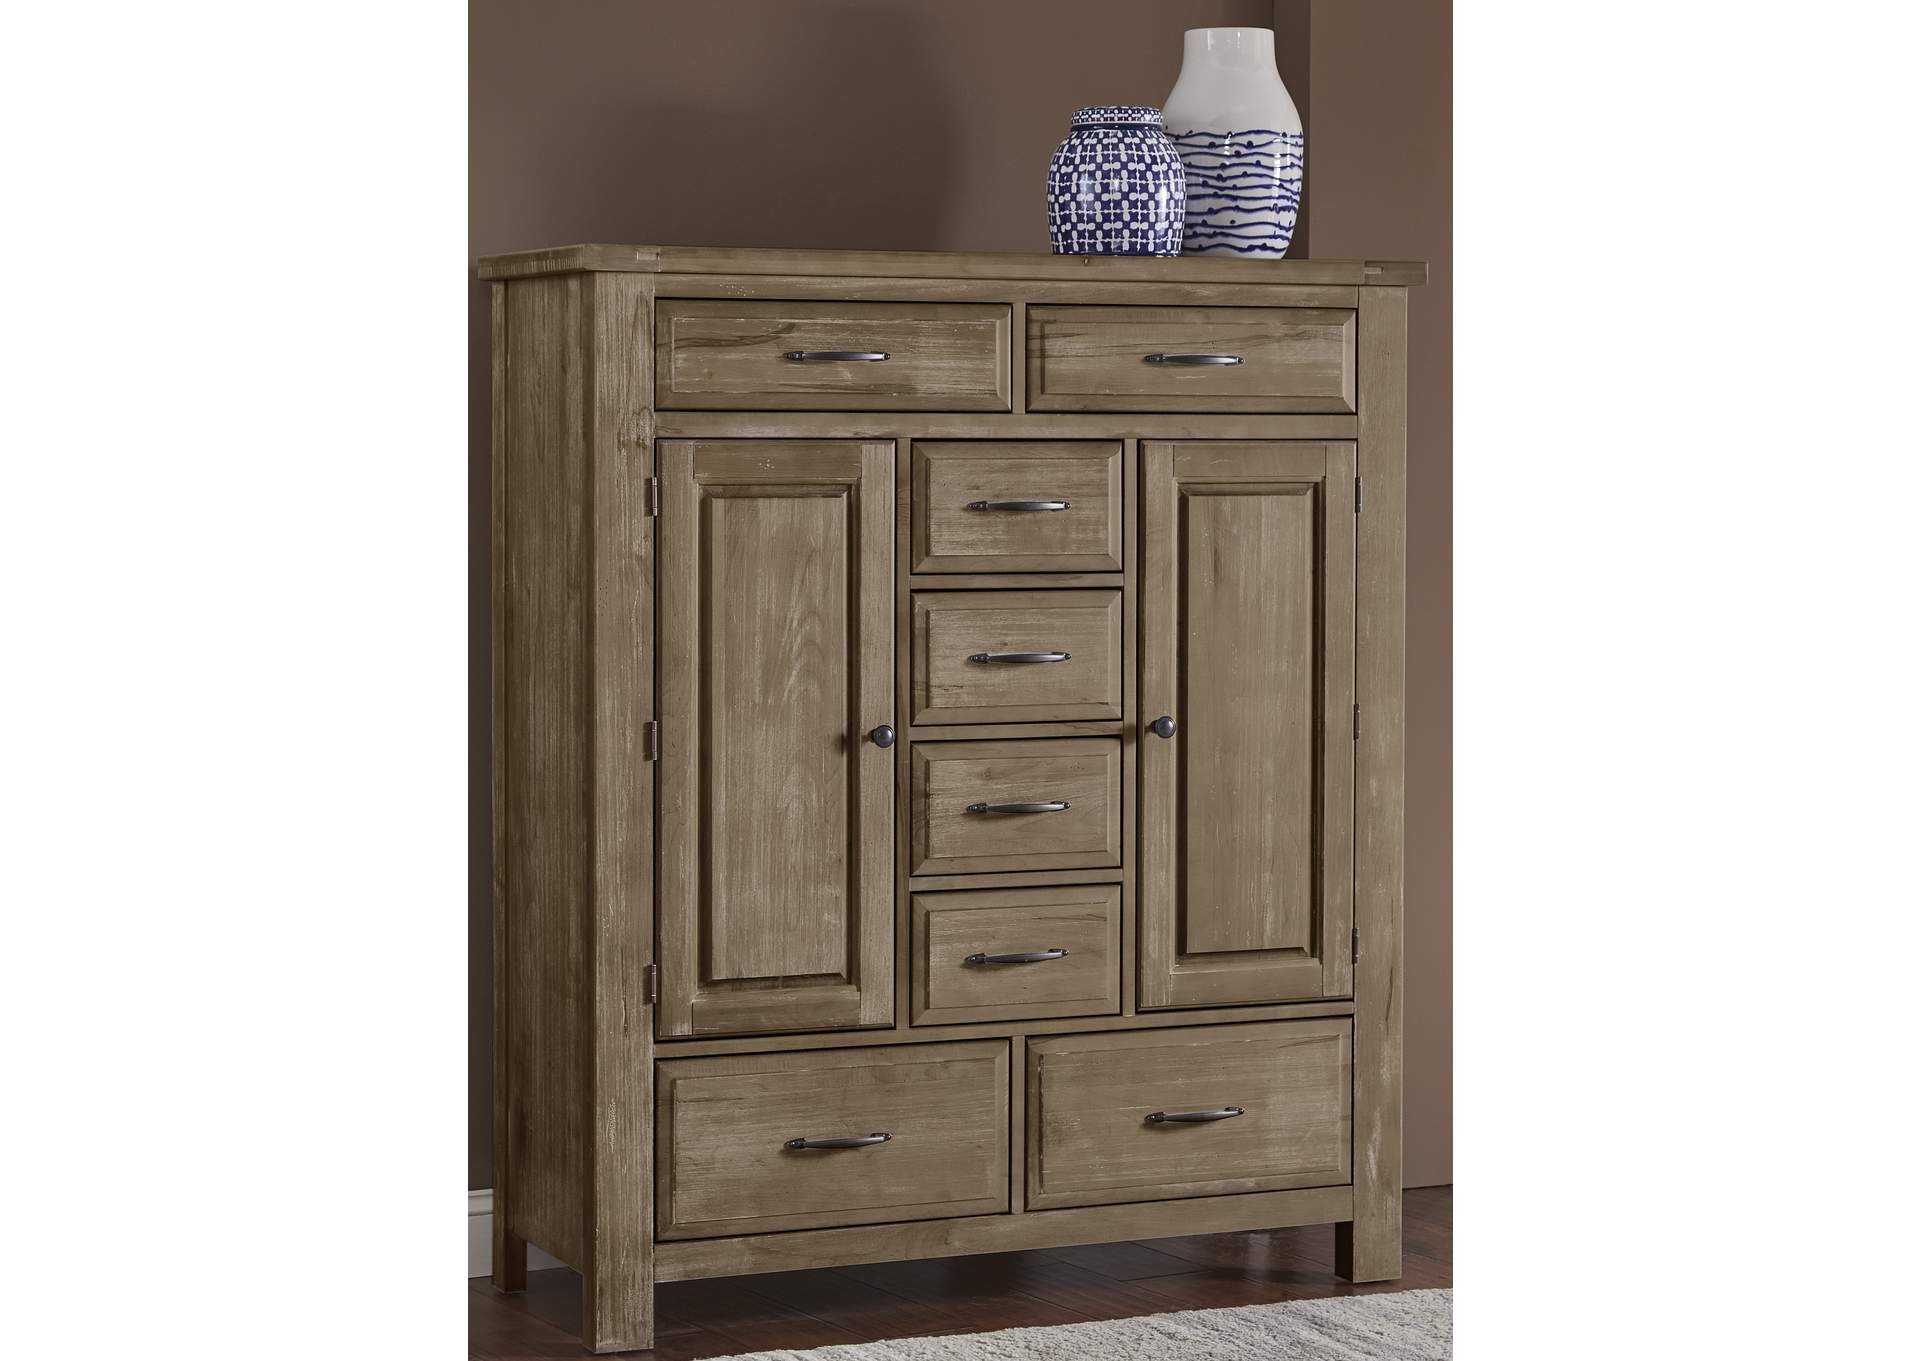 Maple Road Weathered Gray Sweater Chest - 8 Drawer,Vaughan-Bassett